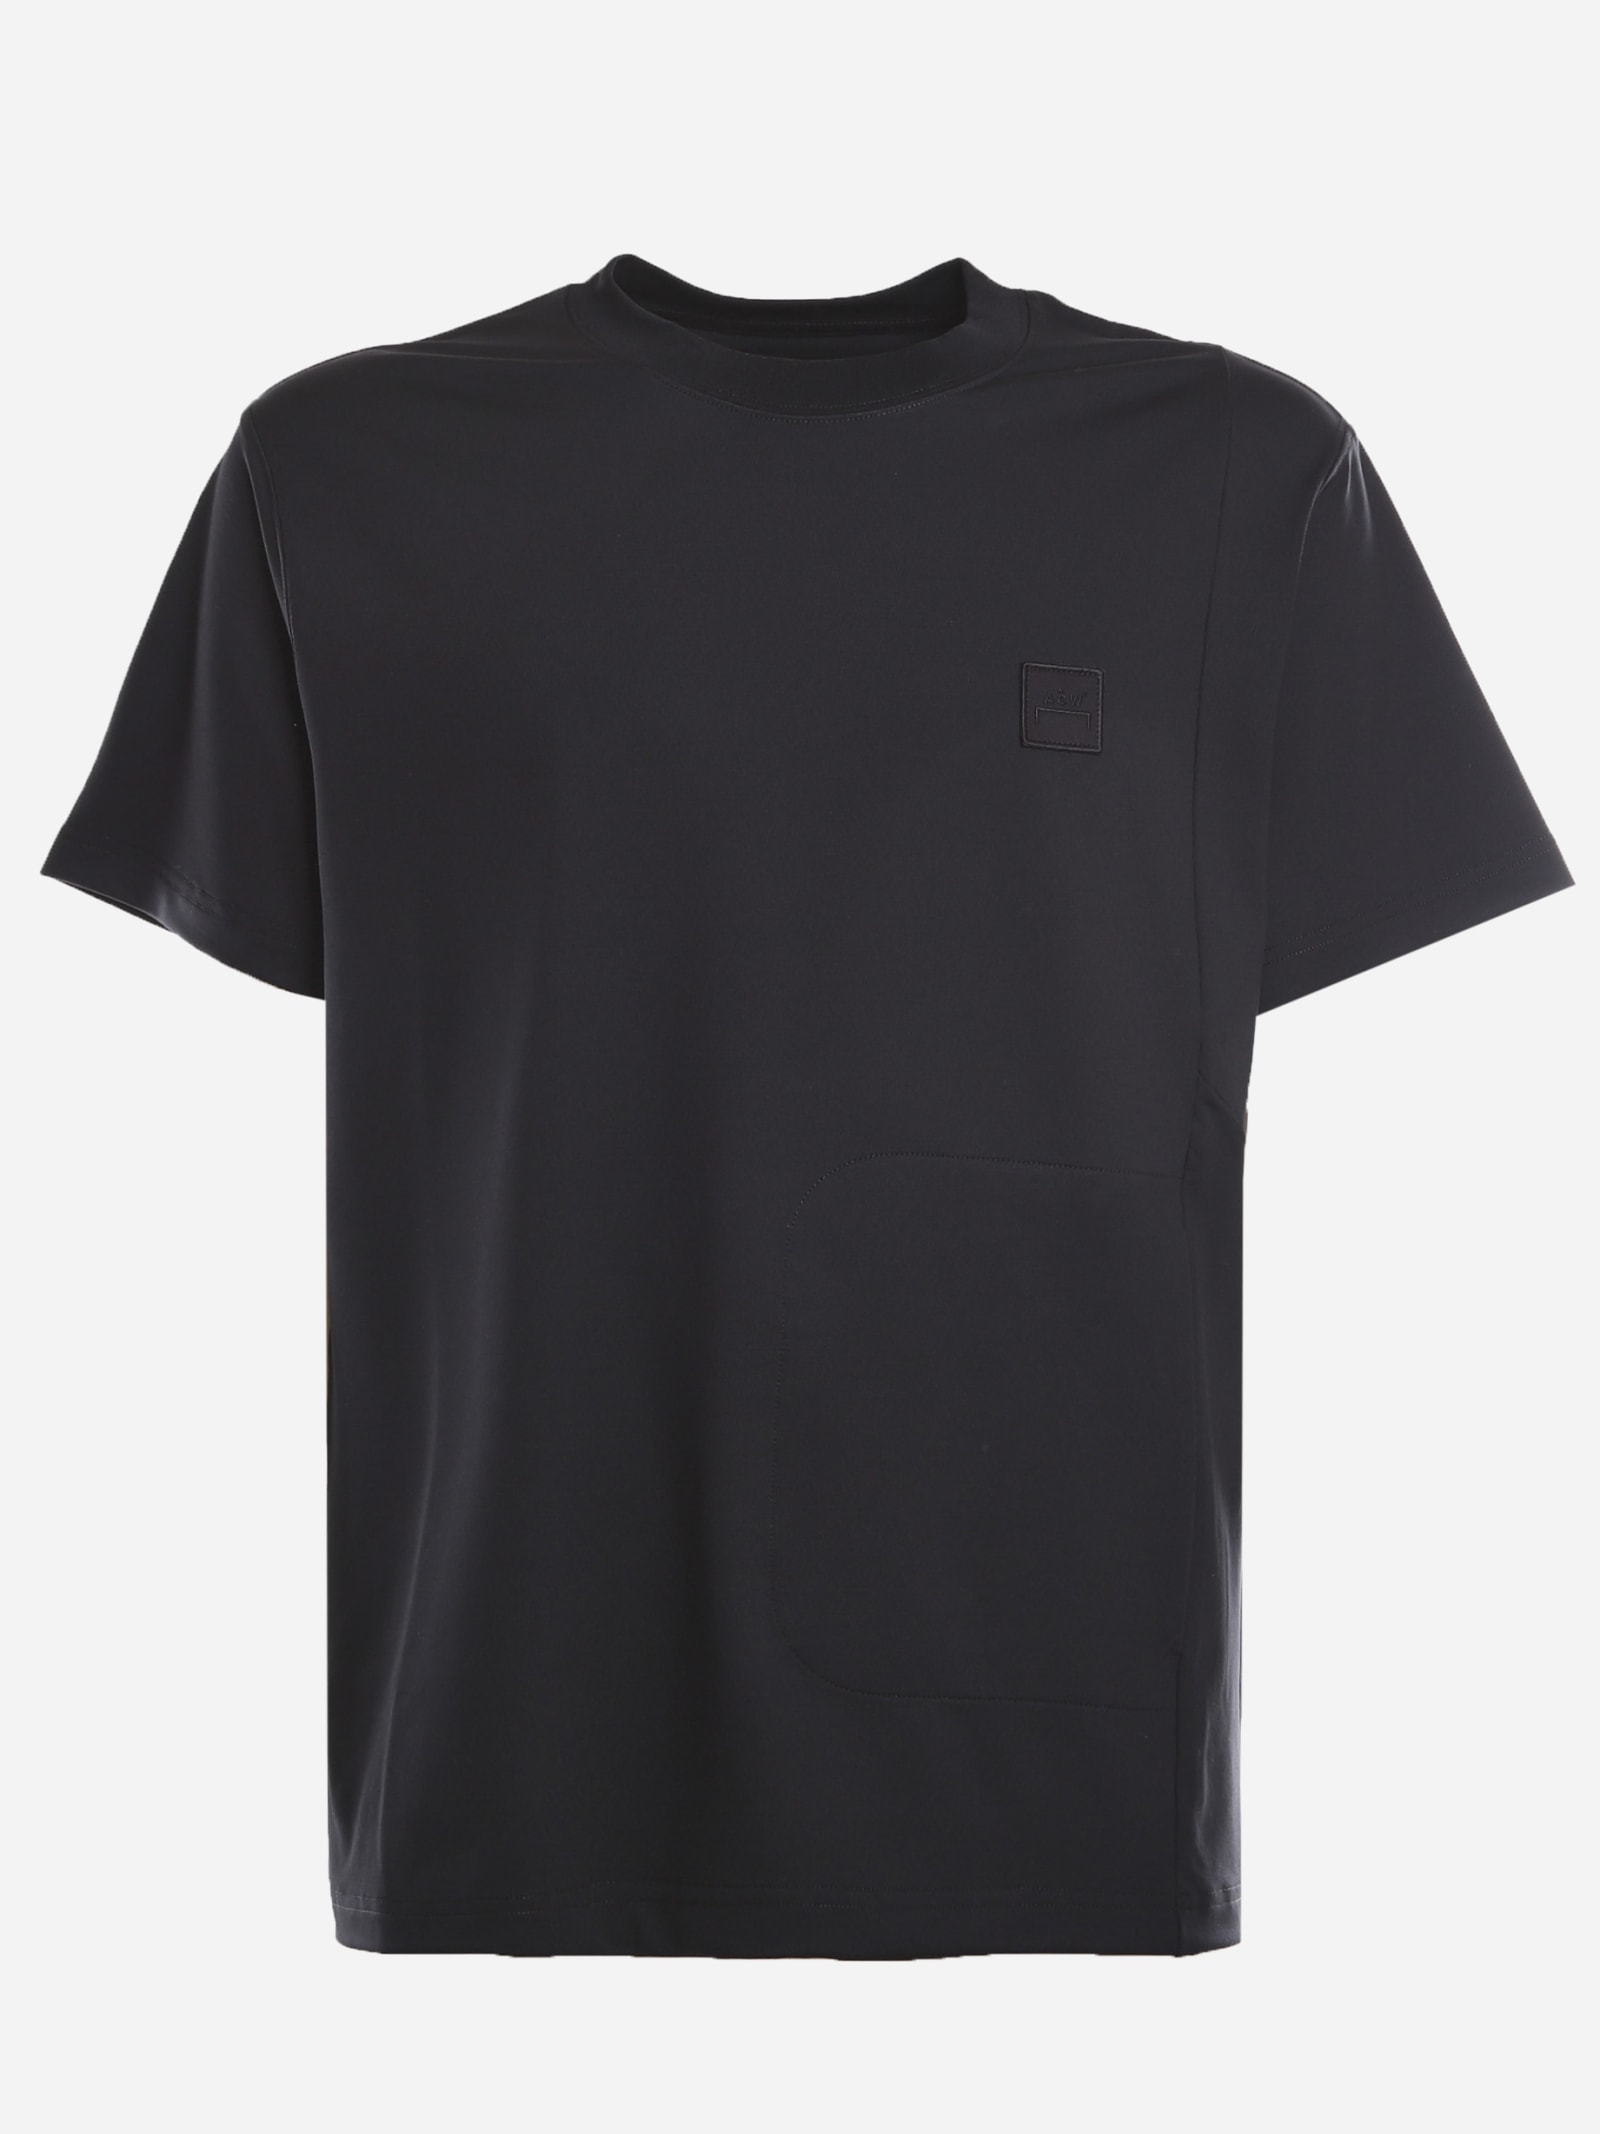 A-COLD-WALL Basic T-shirt With Tone-on-tone Logo Patch